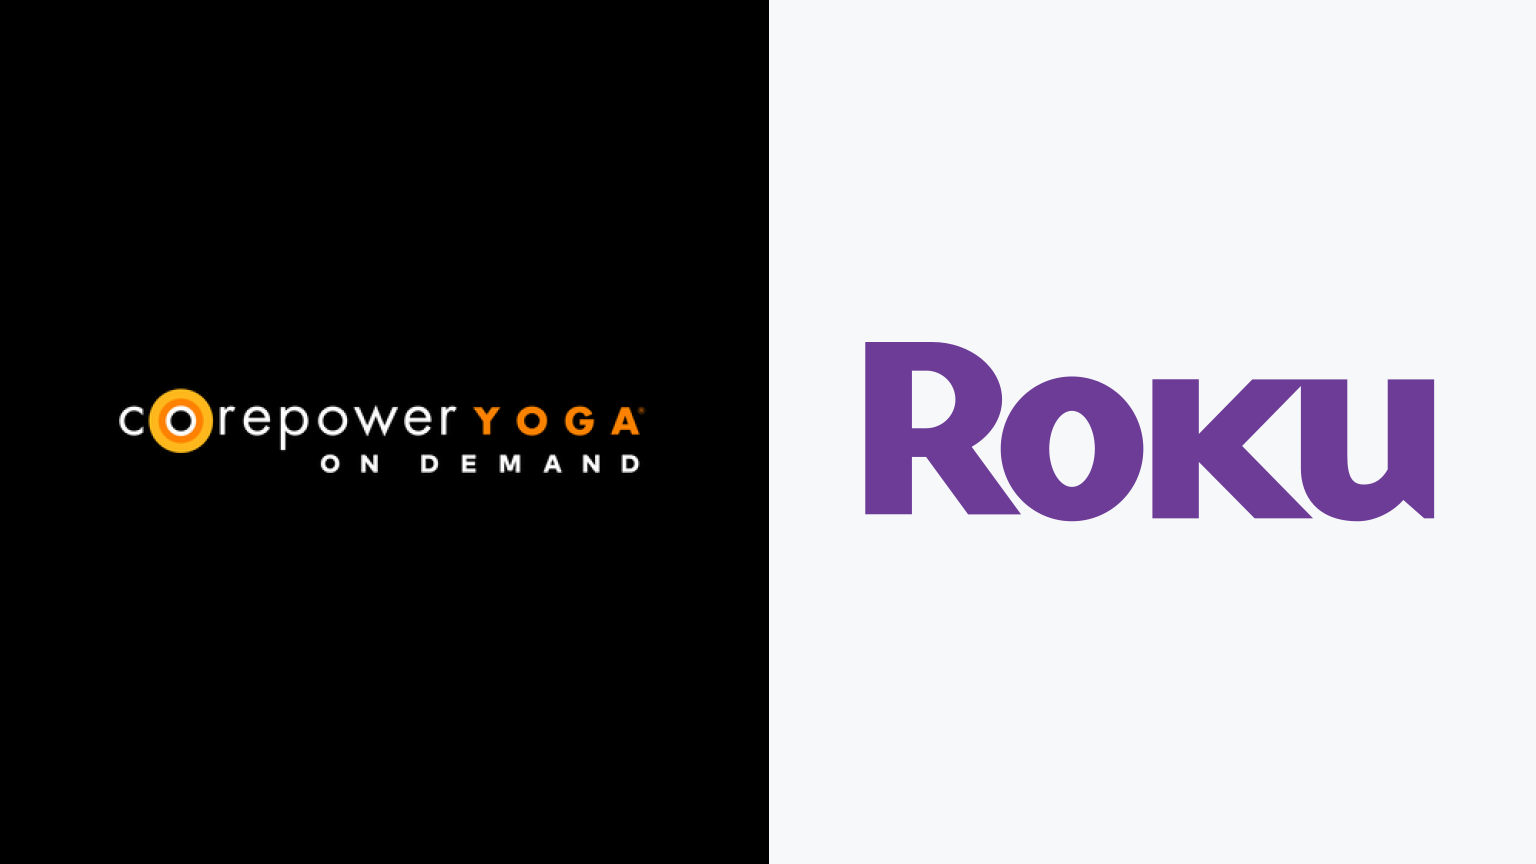 https://thestreamable.com/media/pages/video-streaming/corepower-yoga-on-demand/devices/roku/b3bd473c2c-1678889712/corepower-yoga-on-demand-on-roku-banner-1536x864-crop.png